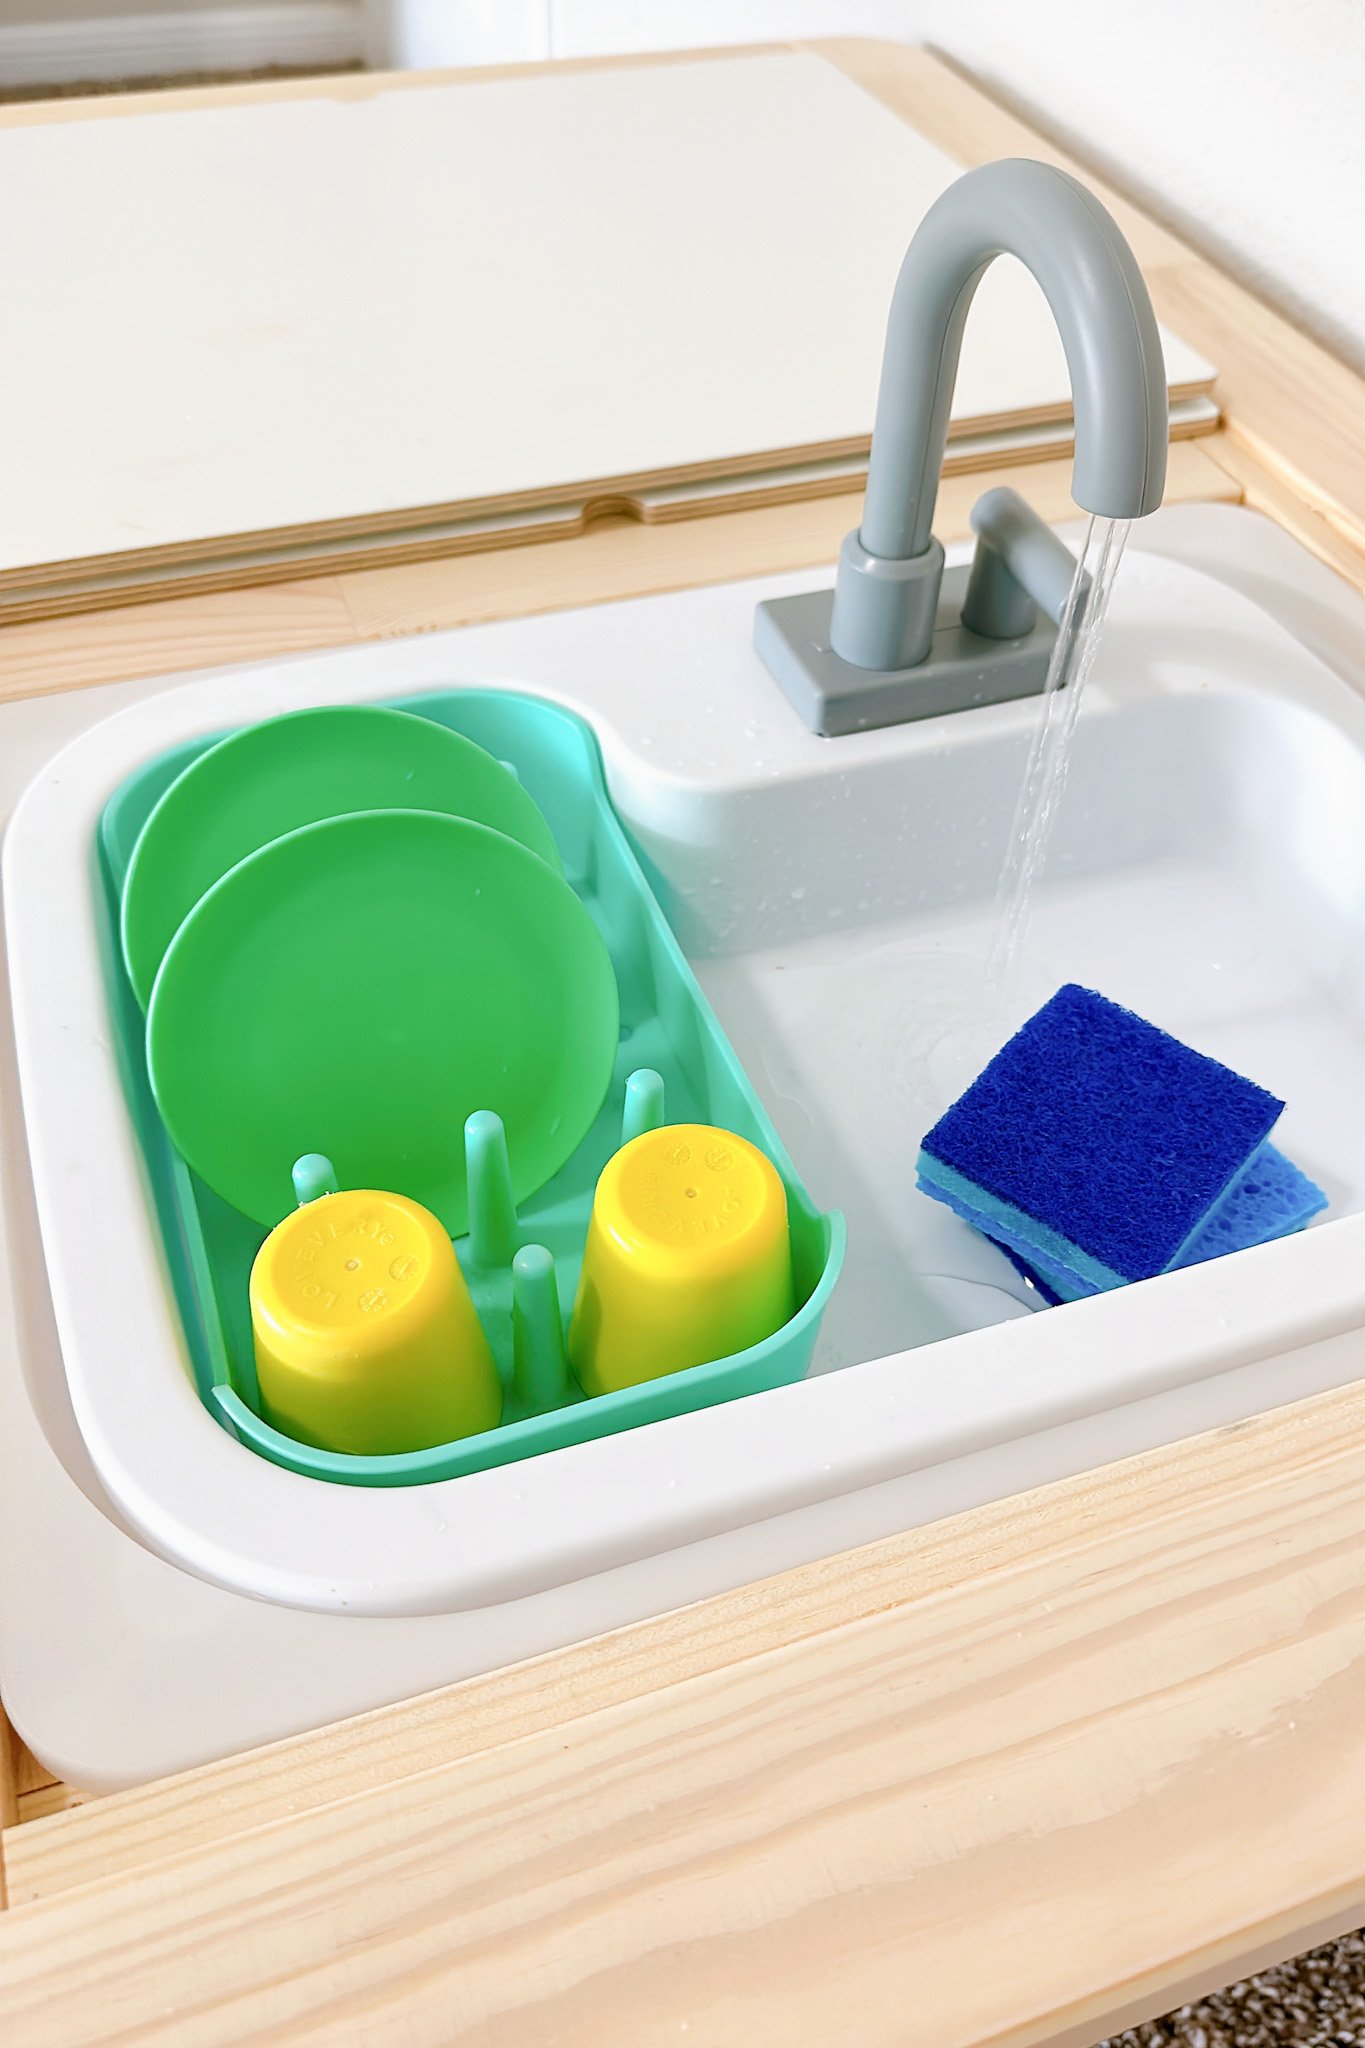 Functional play sink from Lovevery.